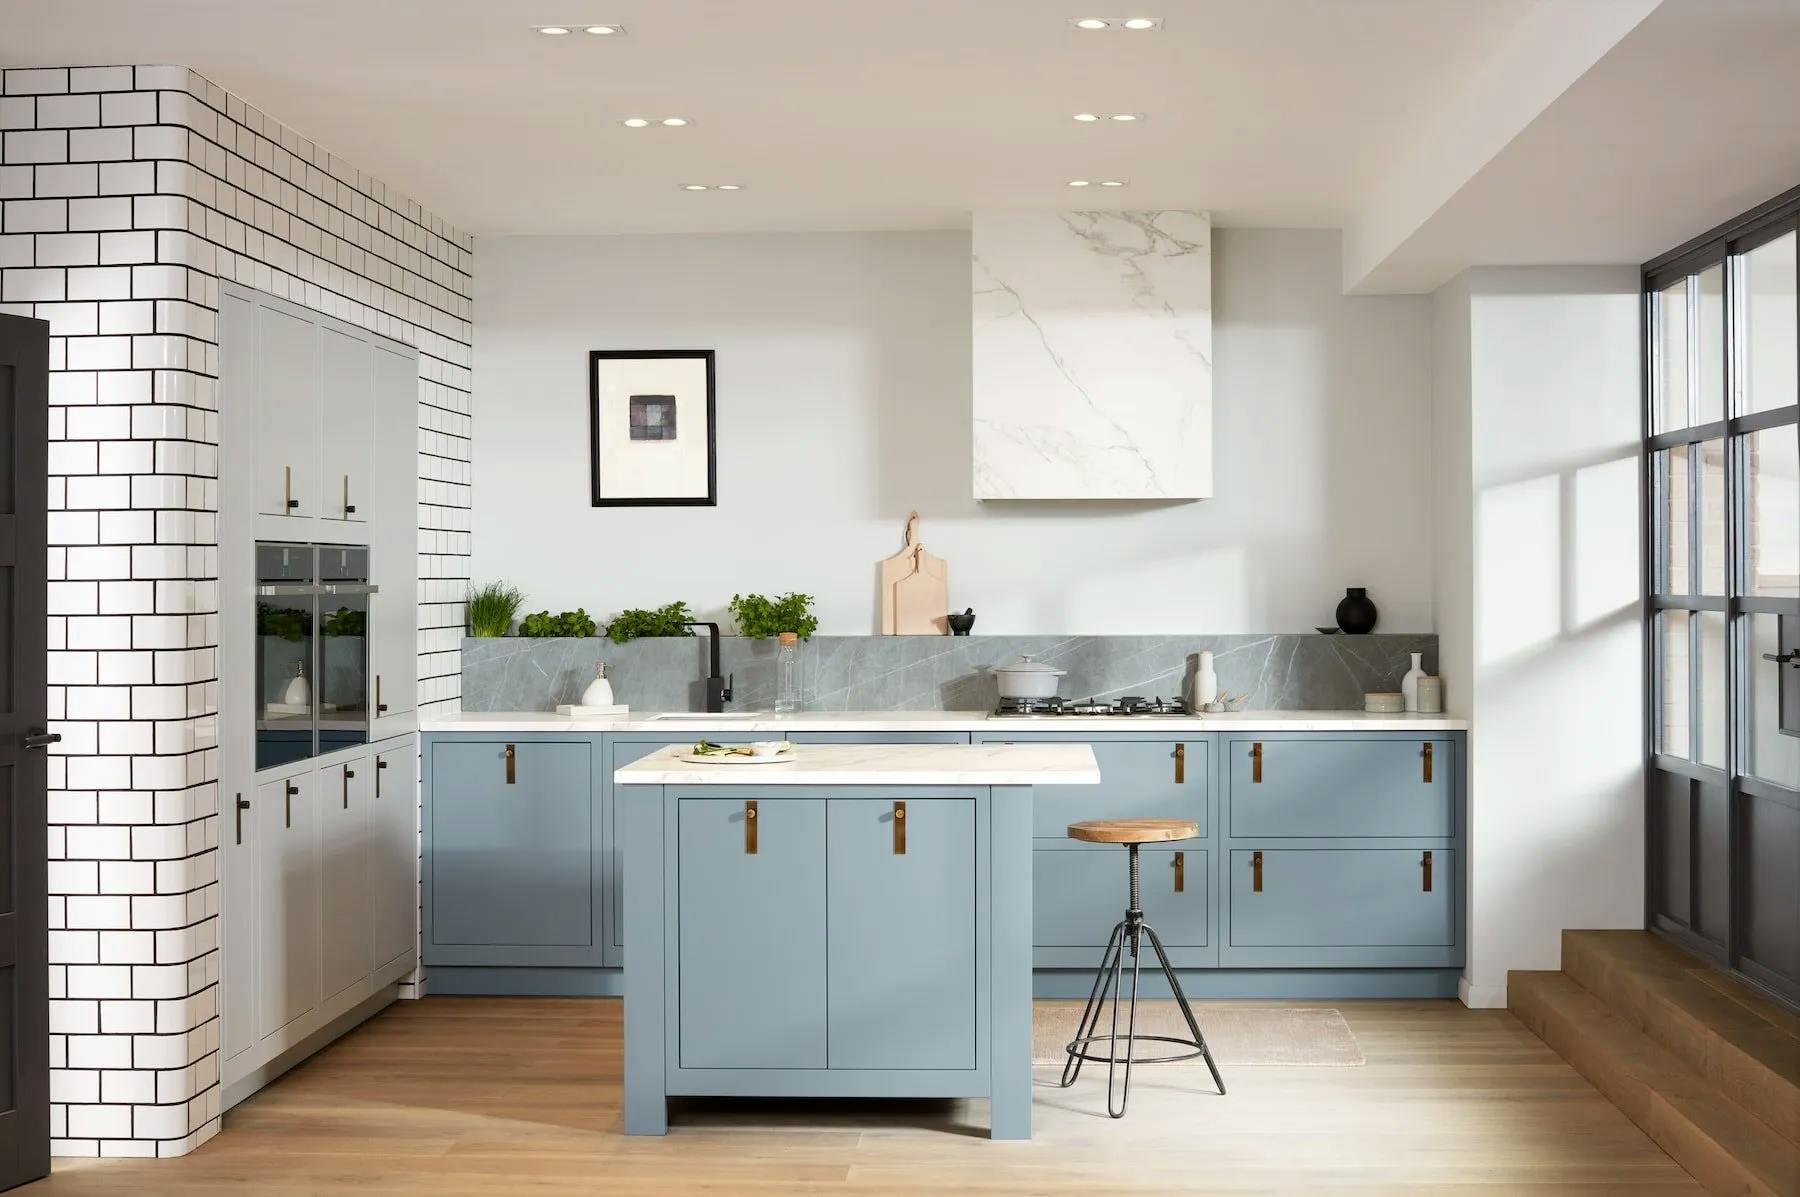 Fitted Kitchens Guide – Top 3 Tips